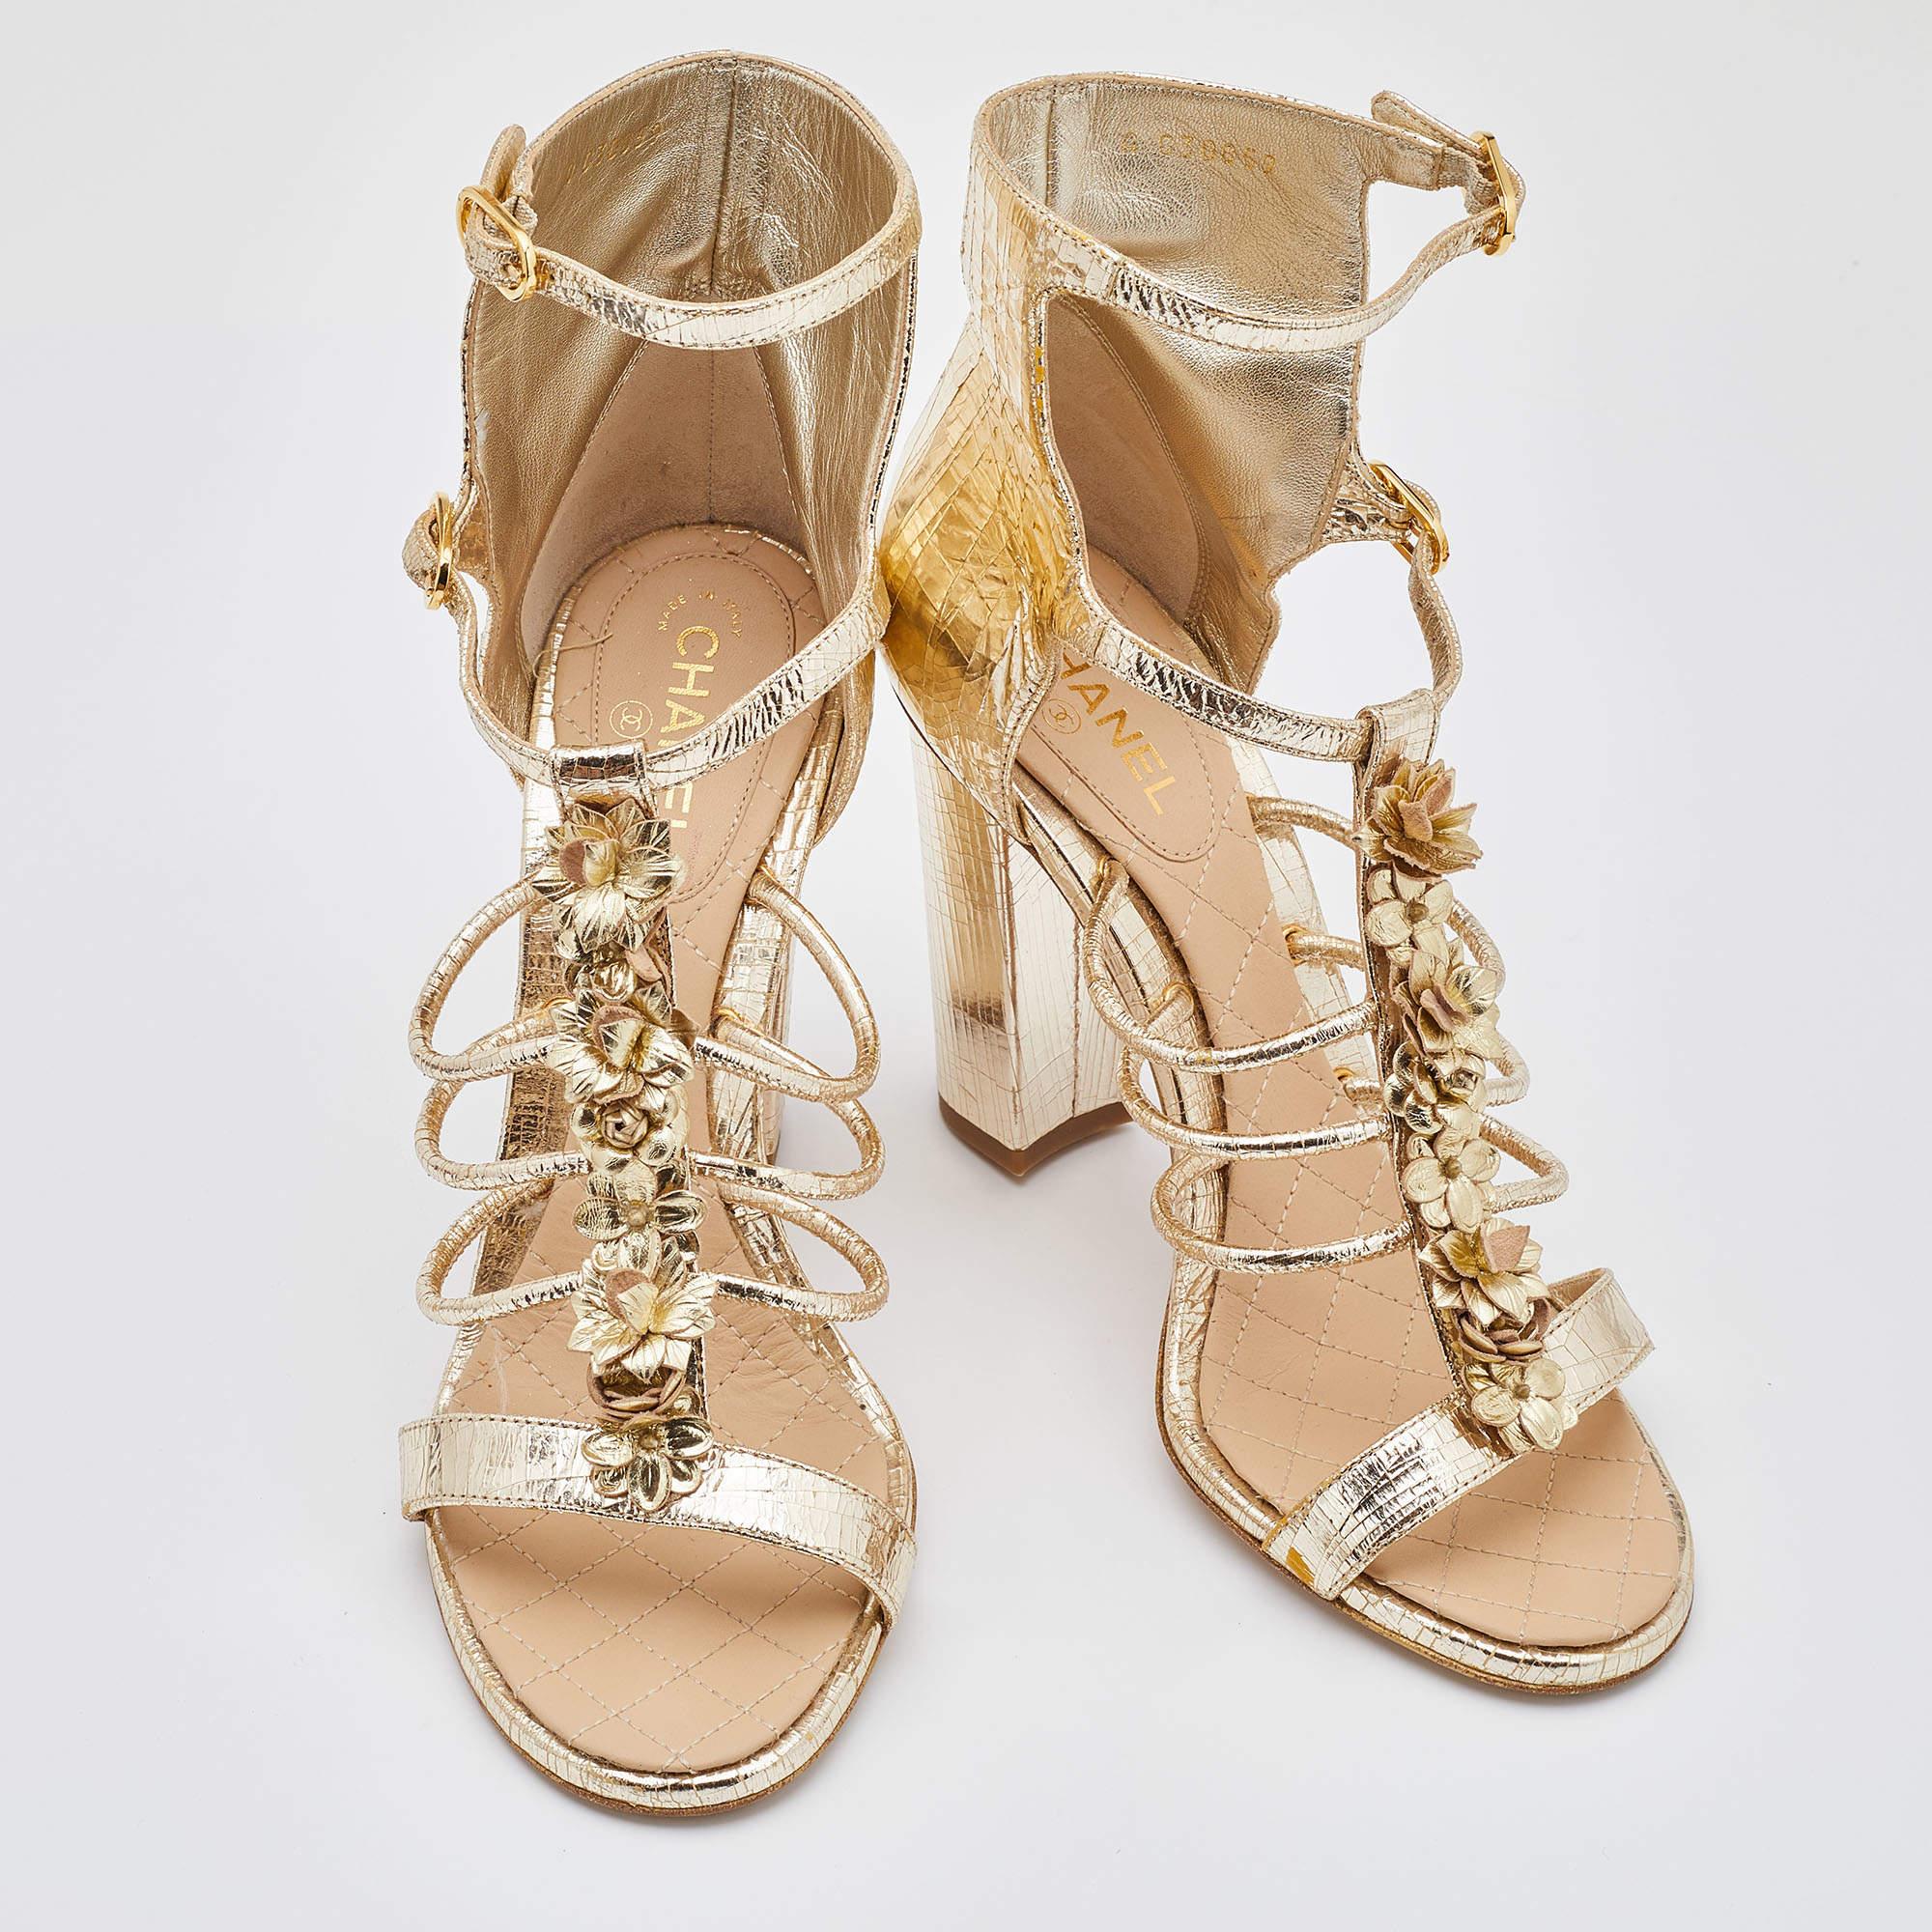 Chanel Metallic Gold Textured Leather Camellia Ankle Strap Sandals Size 39.5 1